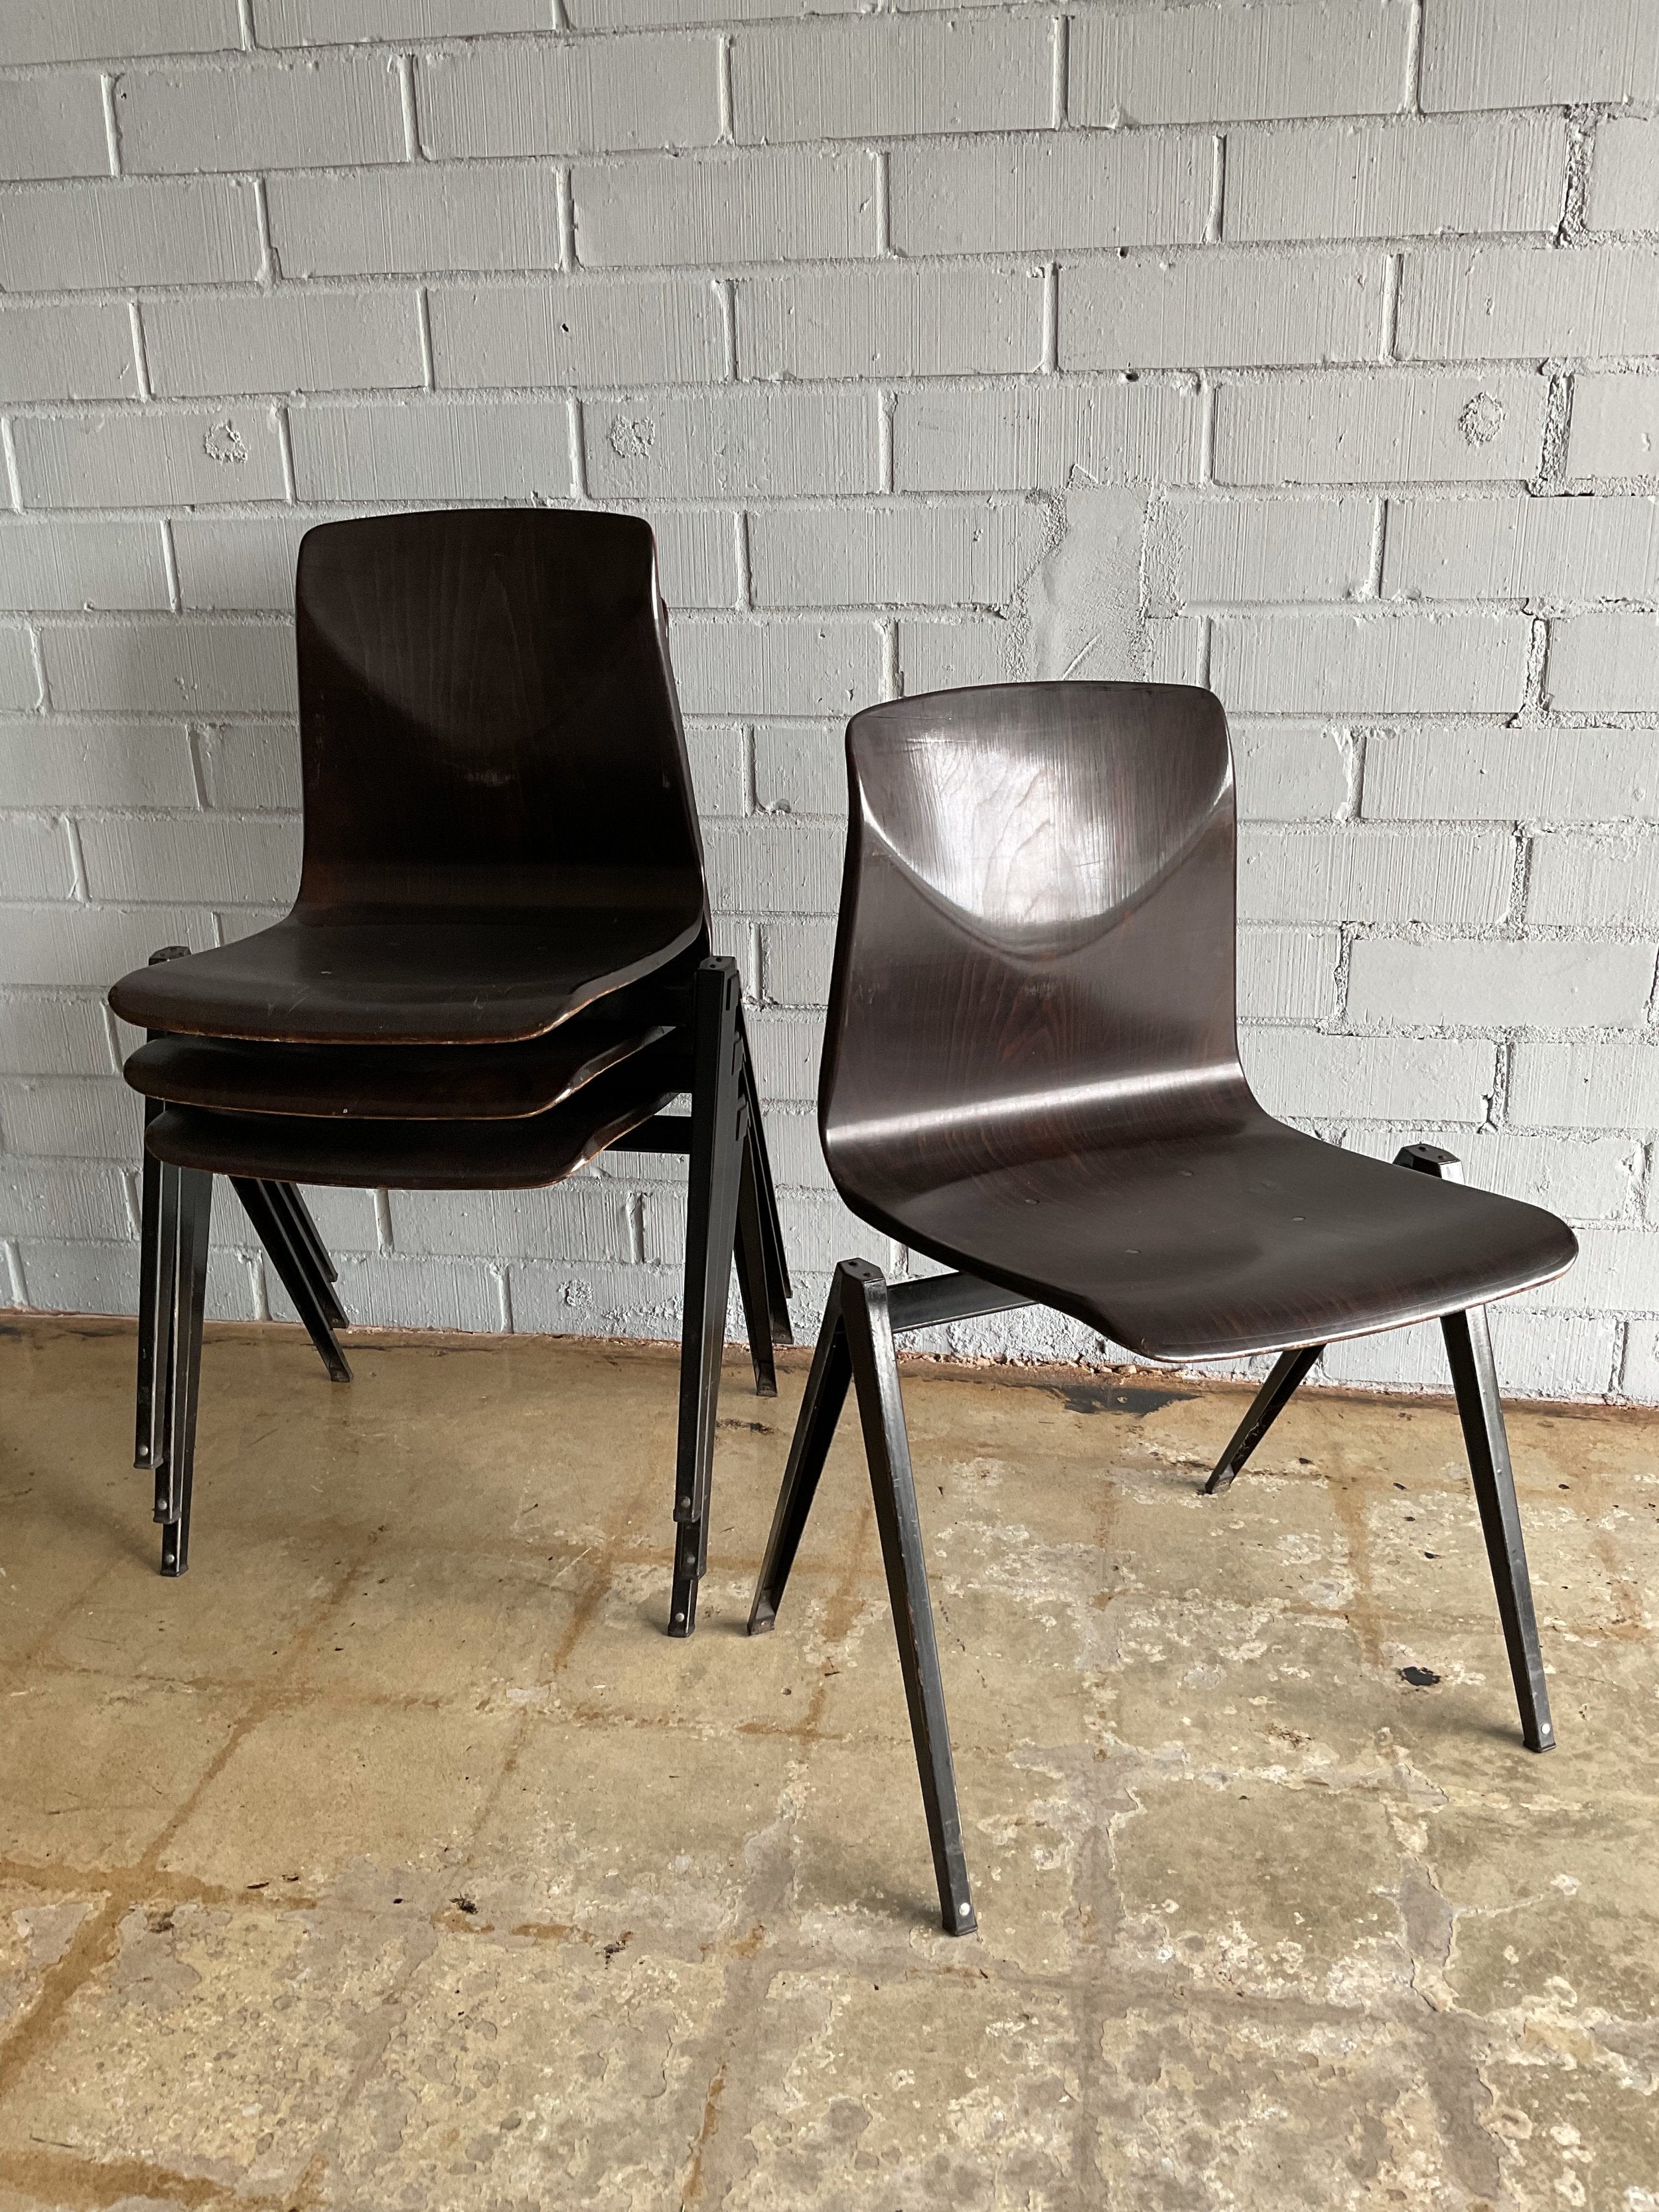 GALVANITAS STACKABLE INDUSTRIAL CHAIRS, SET OF FOUR